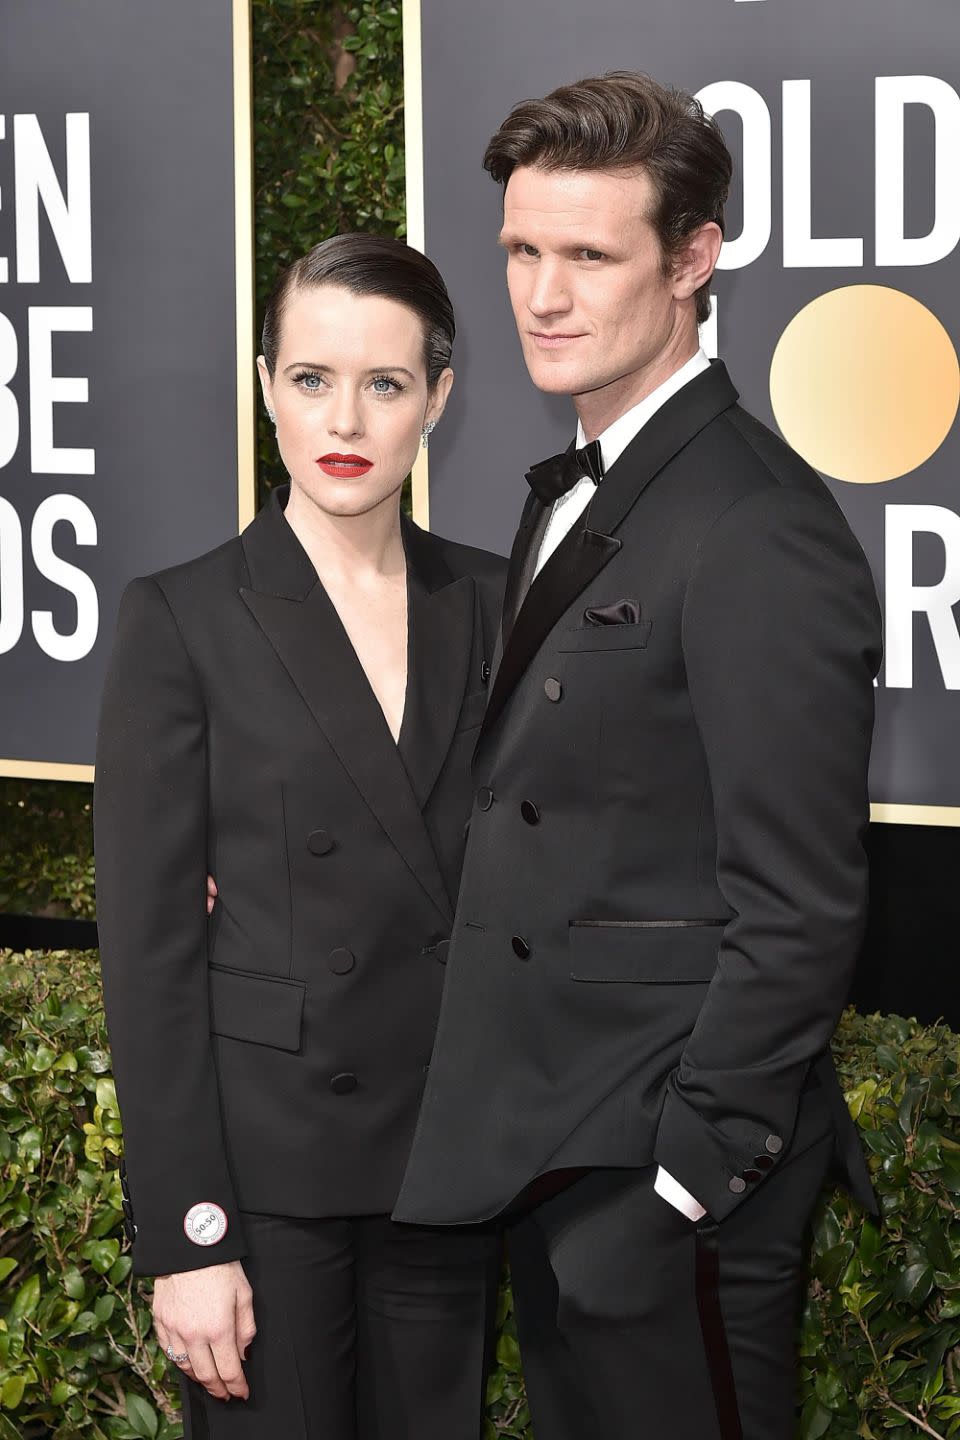 Claire, 33, was reportedly paid $50,000 per episode but it is unknown how much Matt, 35, was paid. The pair are here together at the 2018 Golden Globes. Source: Getty